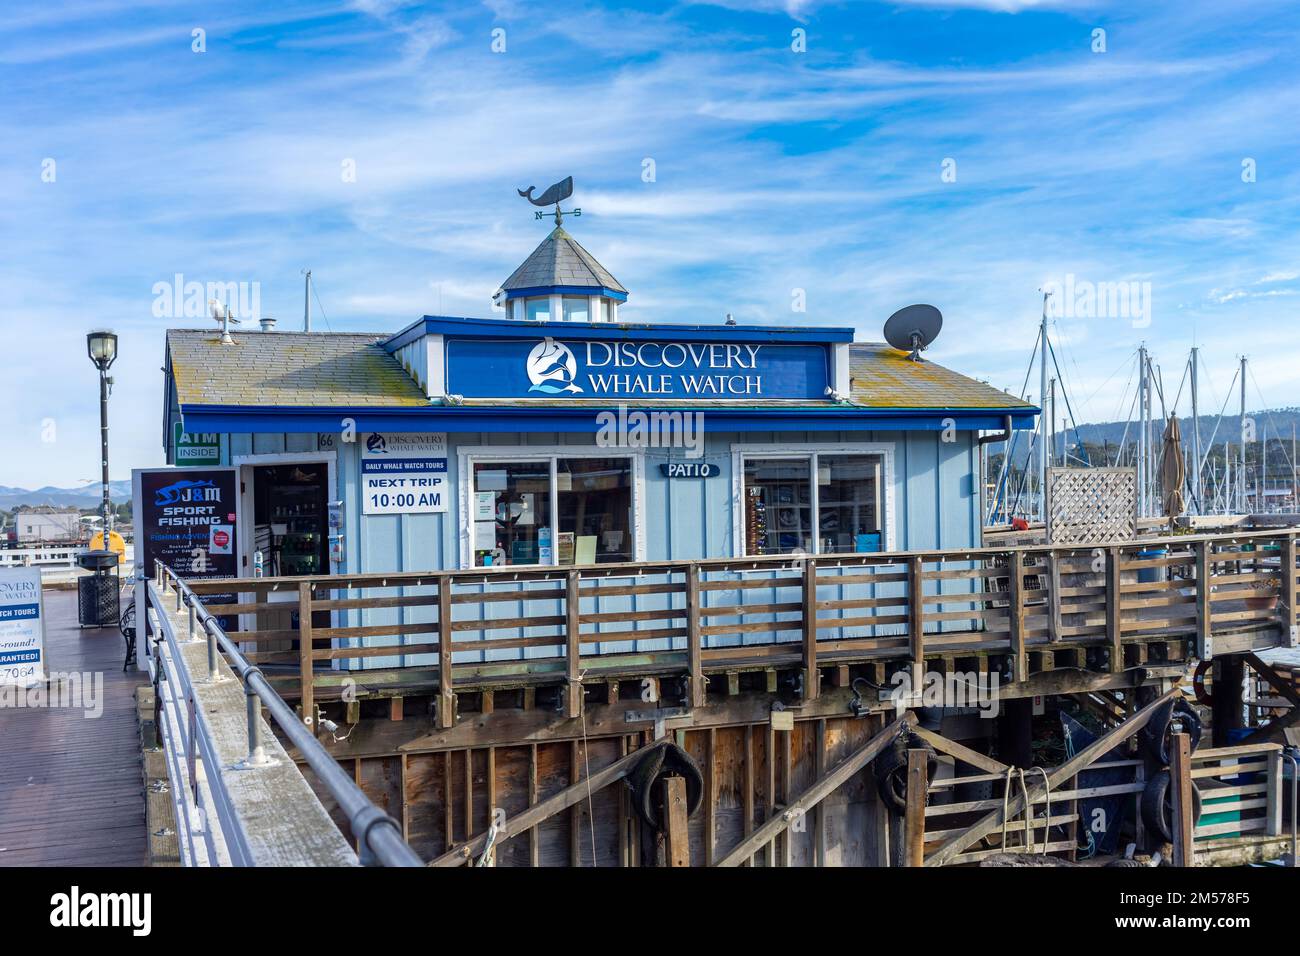 Monterey, CA, USA – December 17, 2022: Office for Discovery Whale Watch, a popular whale watching tour business, located on Fisherman's Wharf in Monte Stock Photo